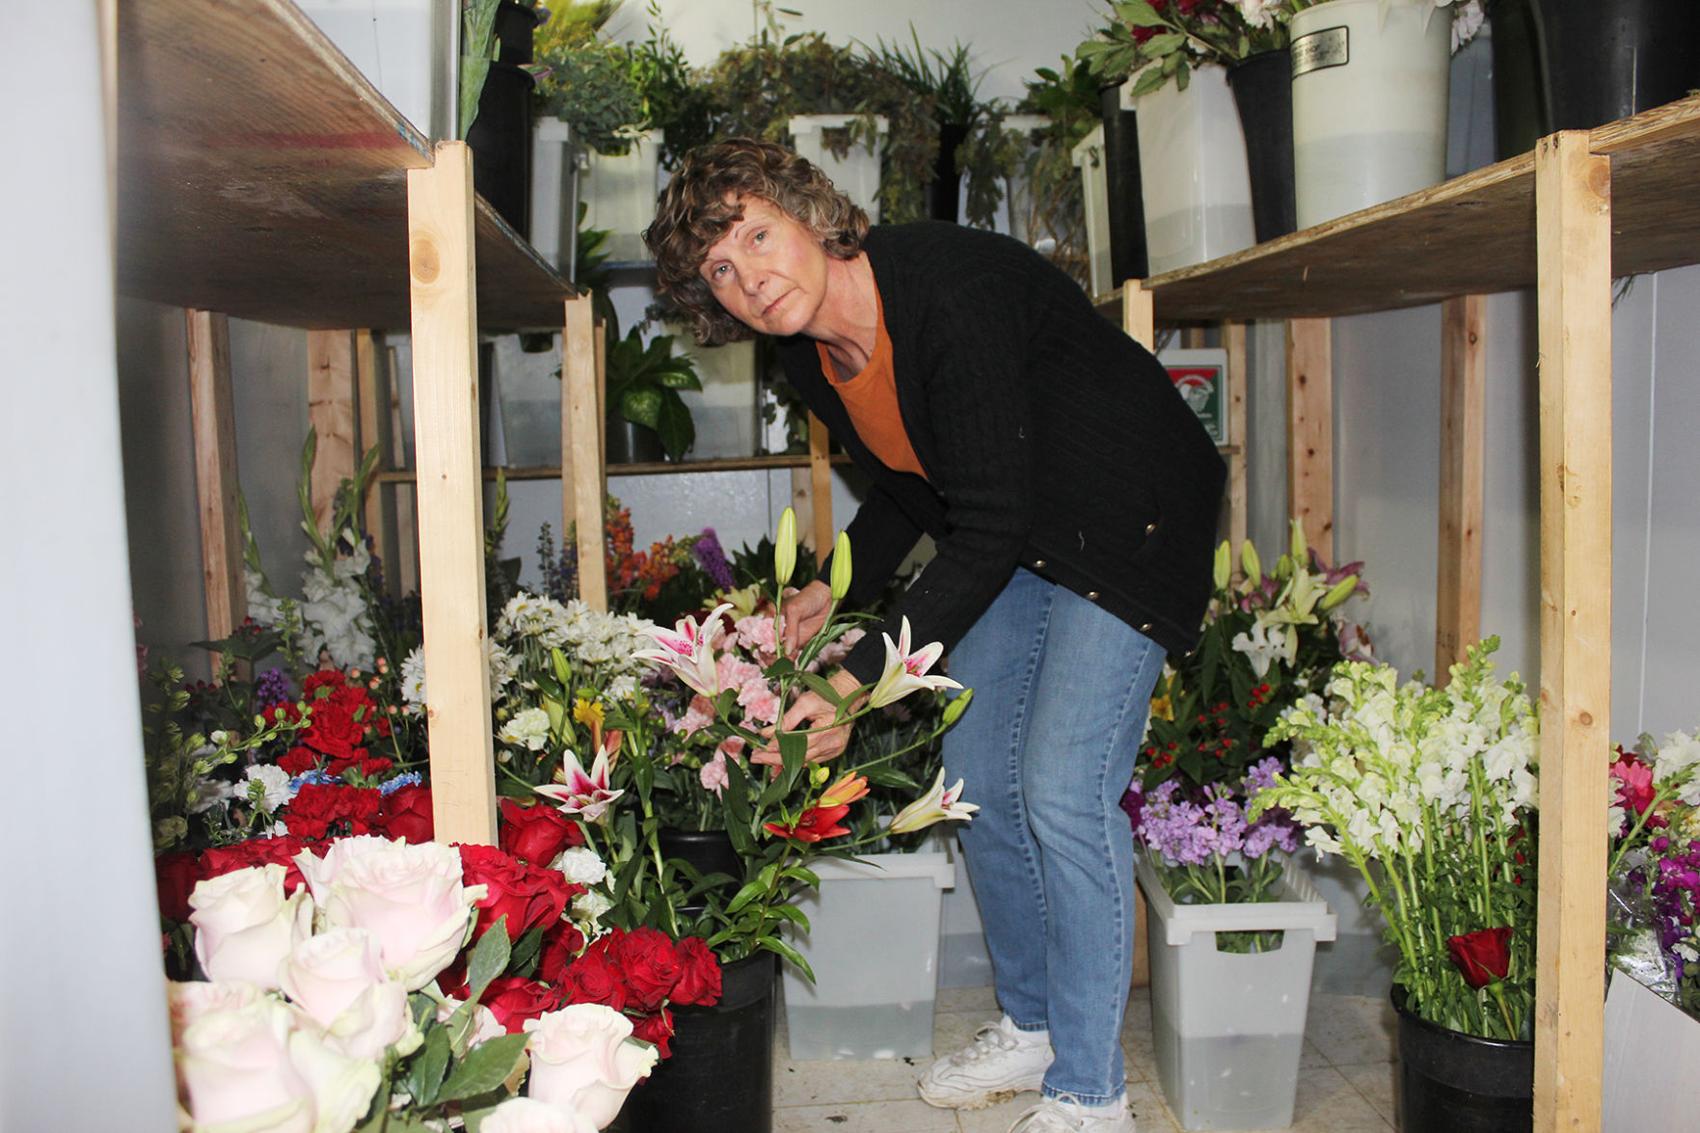 Florists crippled by COVID-19 social restrictions